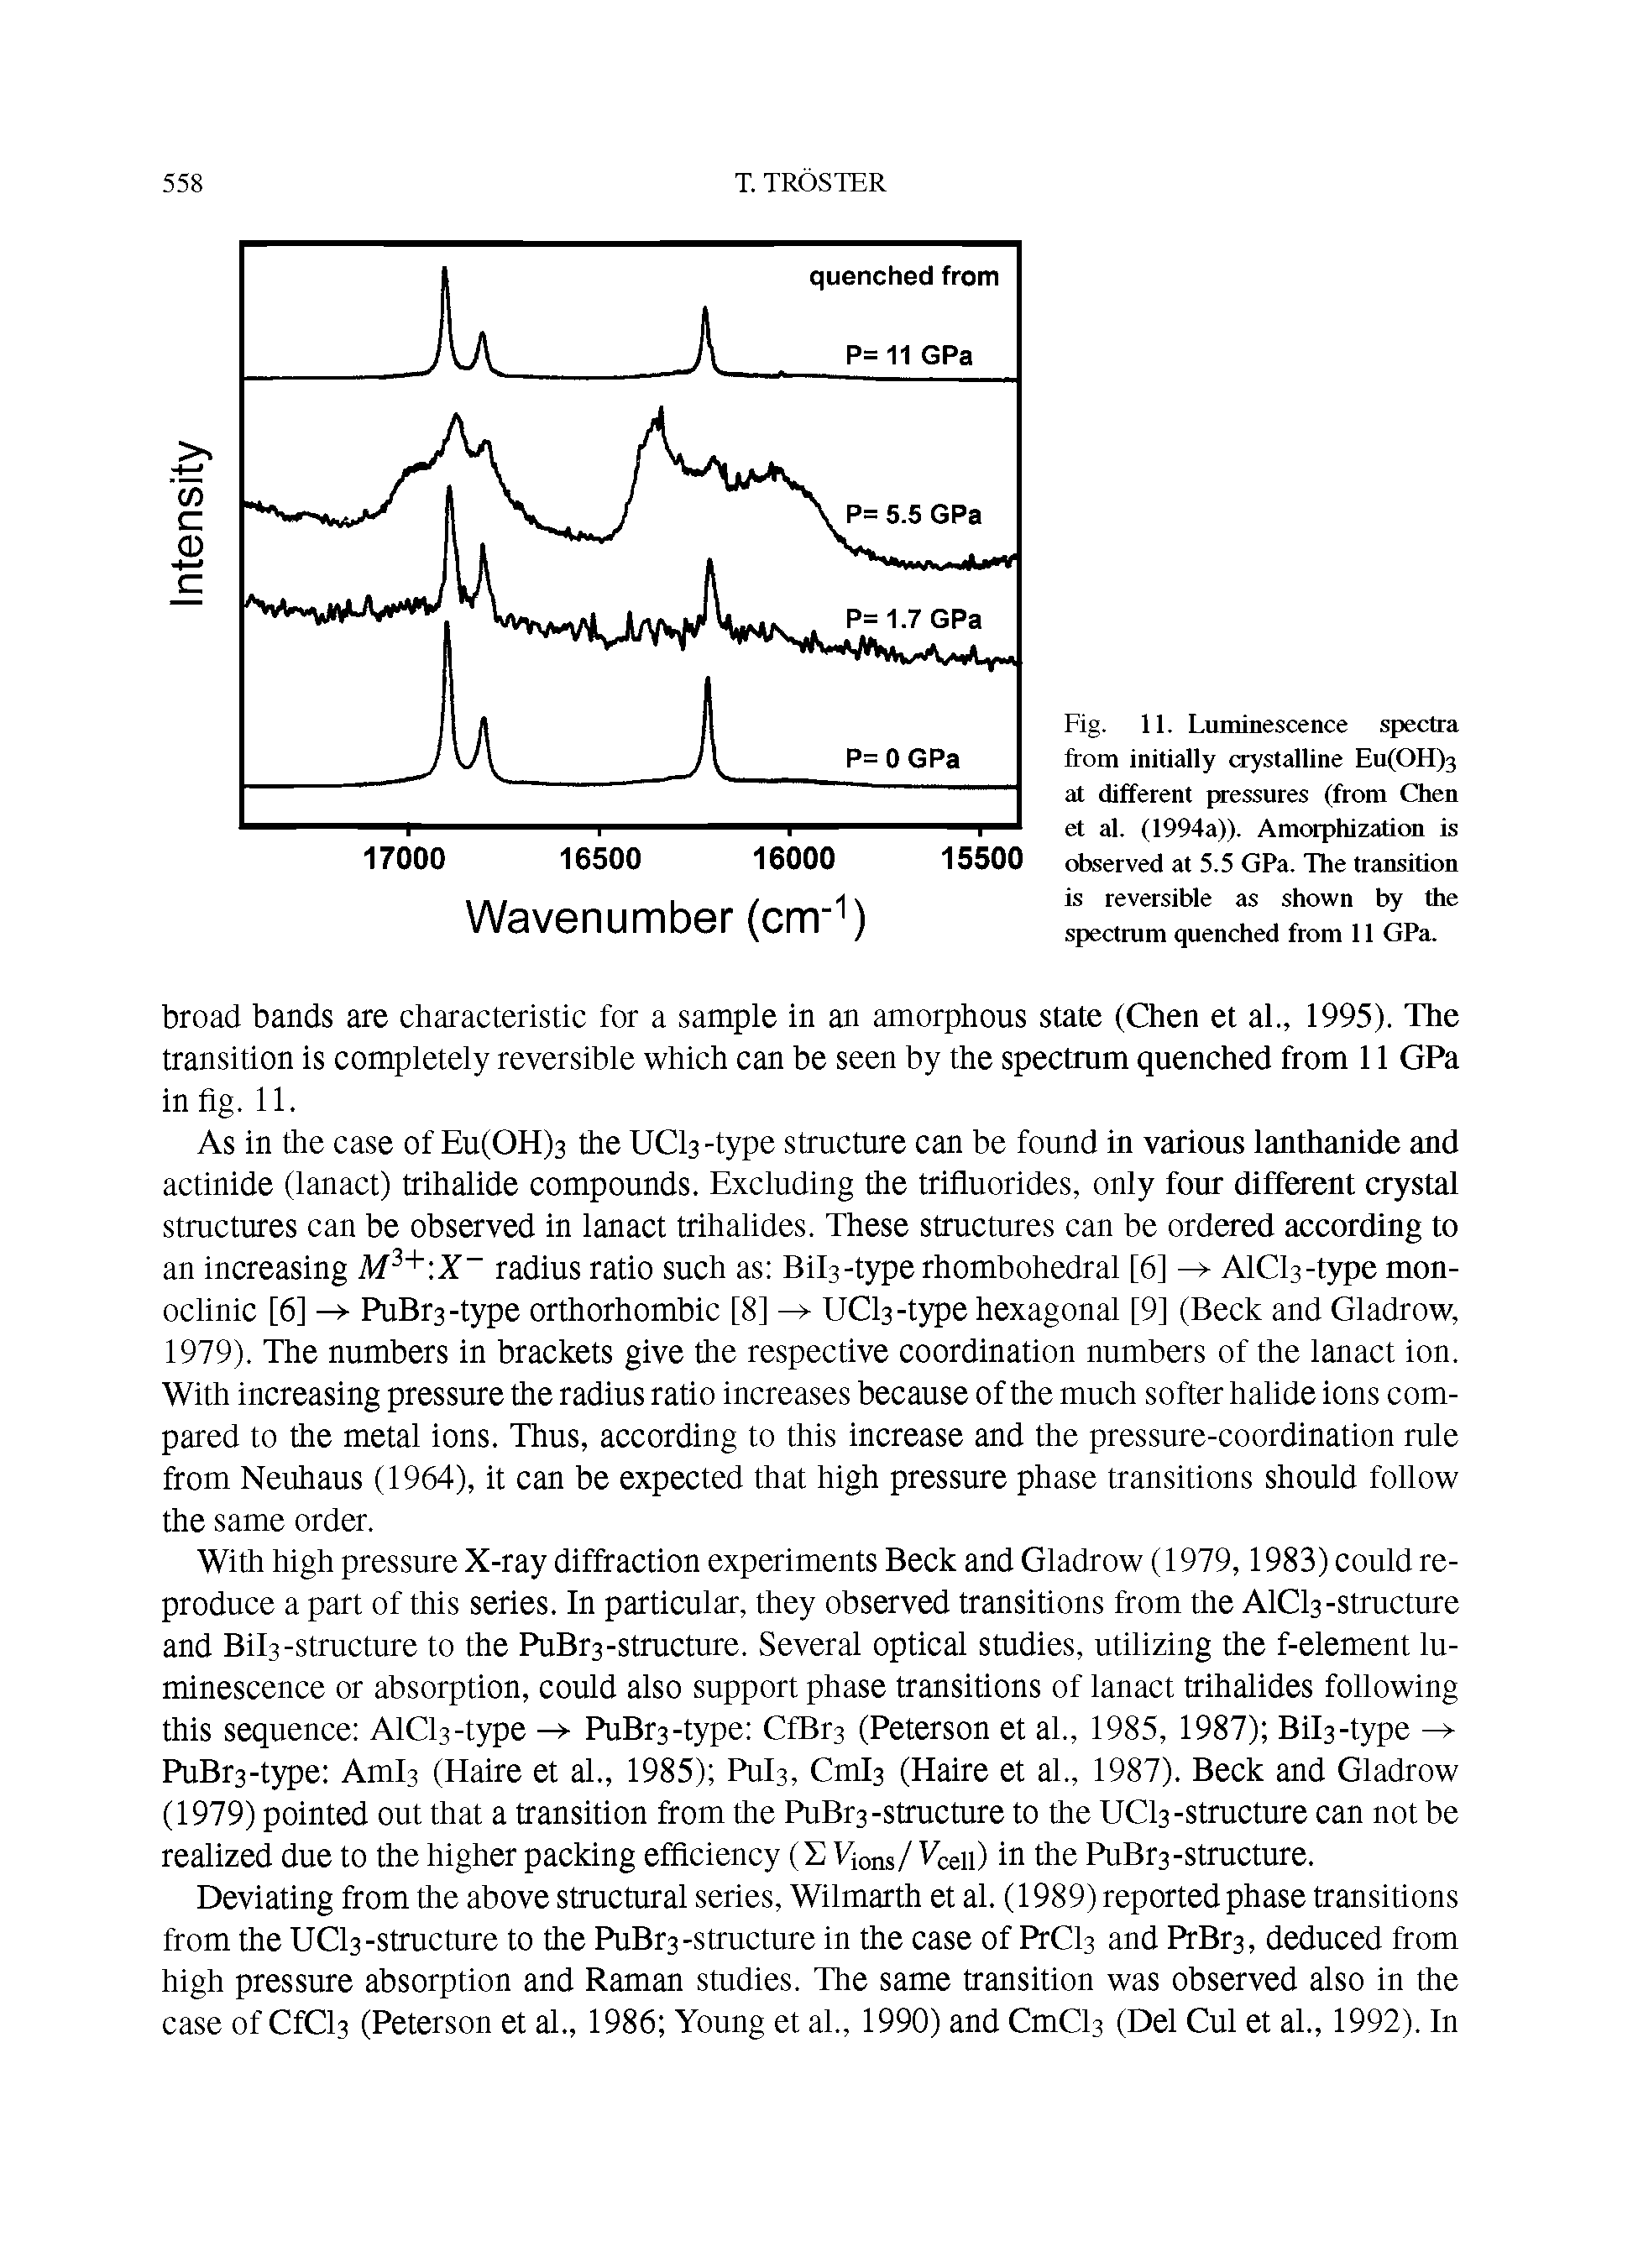 Fig. 11. Luminescence spectra from initially crystalline Eu(OH)3 at different pressures (from Chen et al. (1994a)). Amorphization is observed at 5.5 GPa. The transition is reversible as shown by the spectrum quenched from 11 GPa.